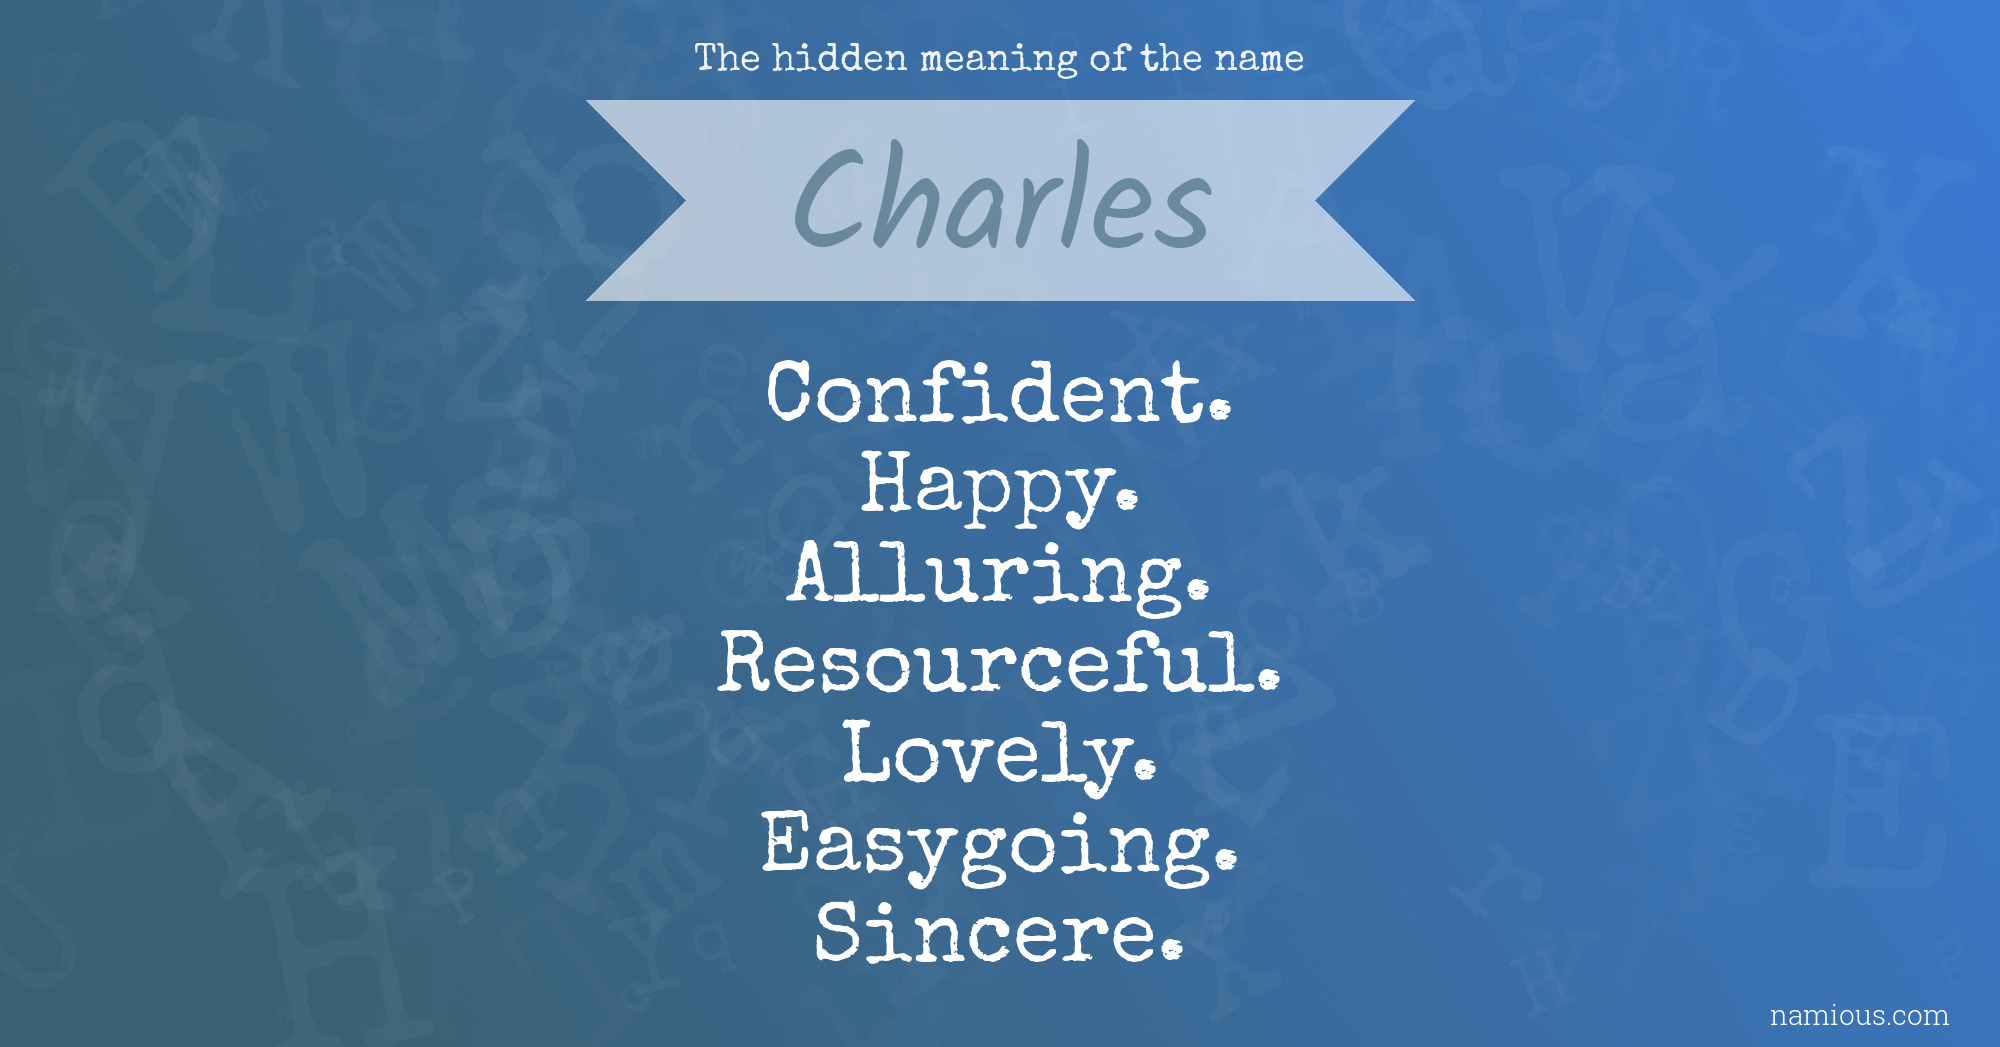 The hidden meaning of the name Charles